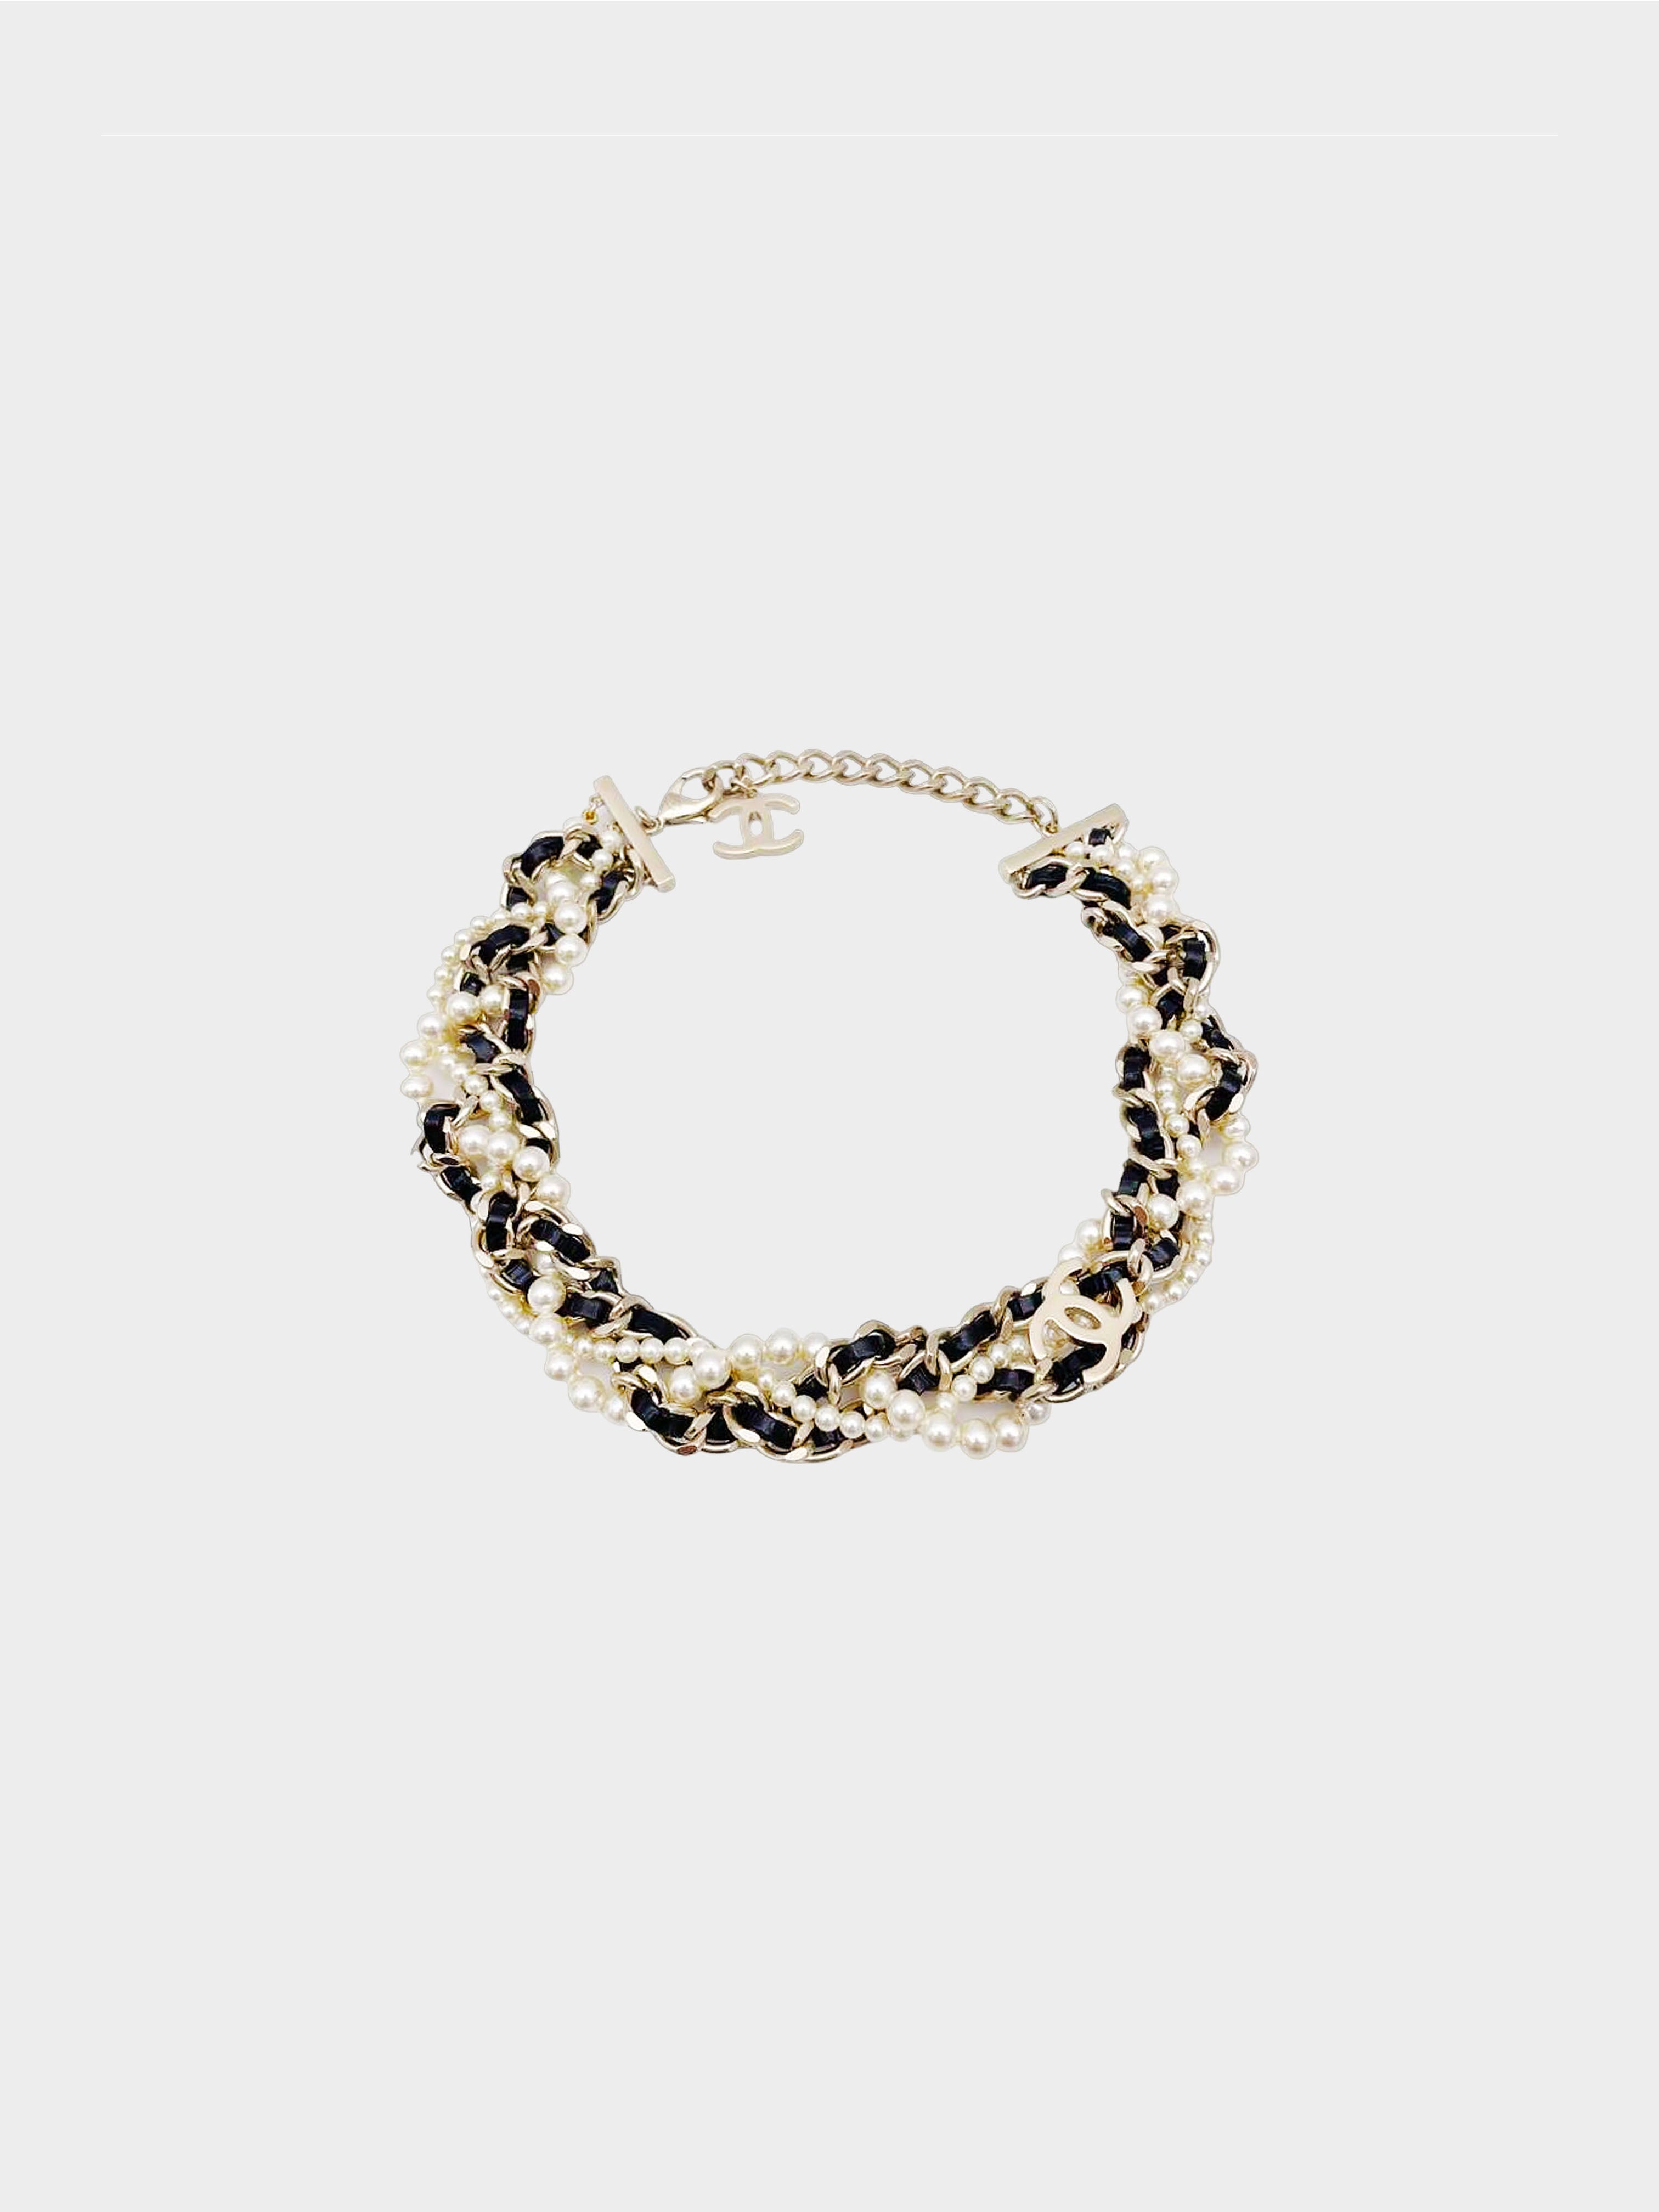 Chanel 2017 Black and Gold CC Pearl Leather Woven Chain Choker